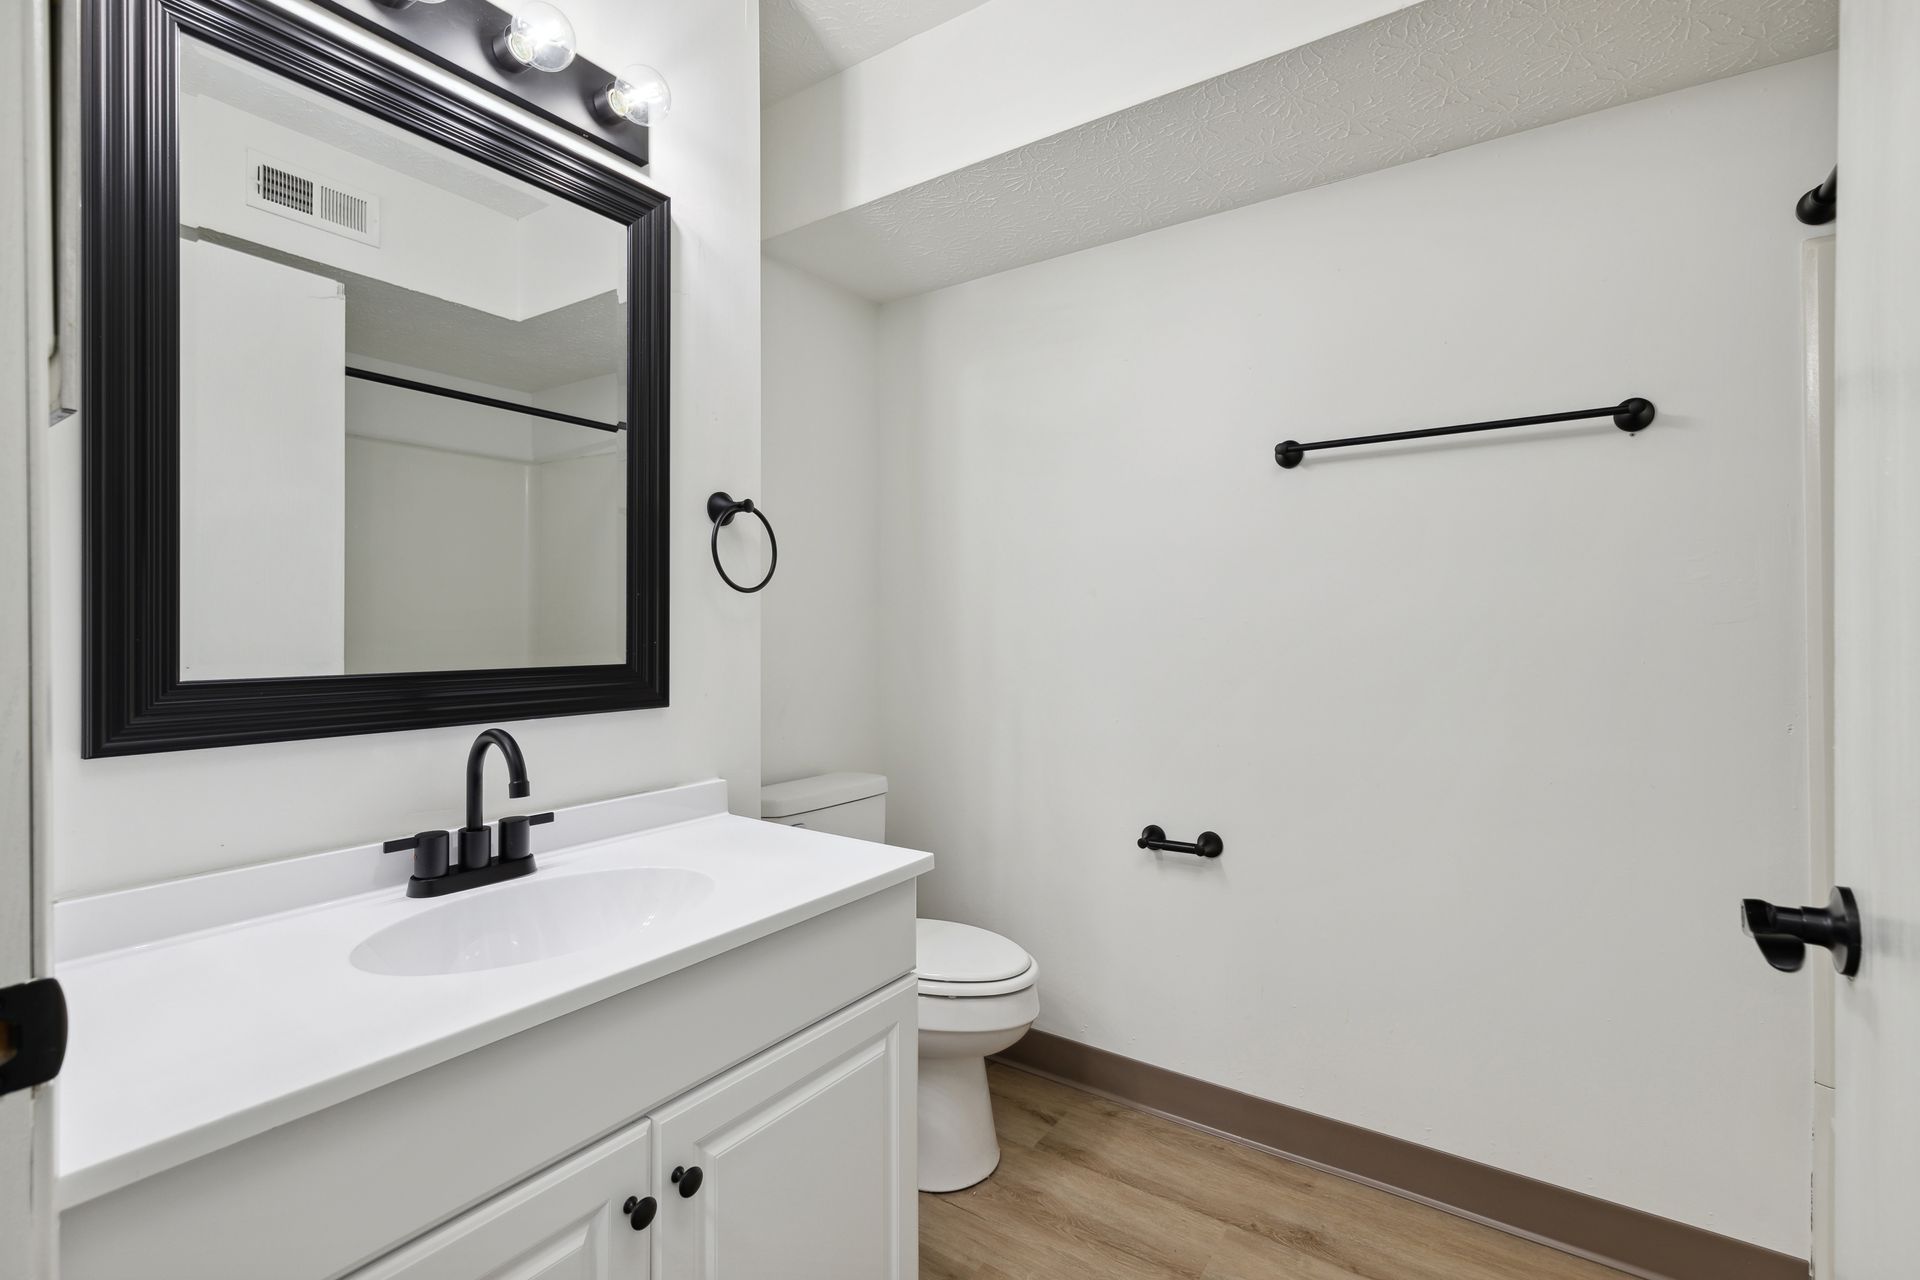 A bathroom with a sink , toilet , mirror and towel rack.